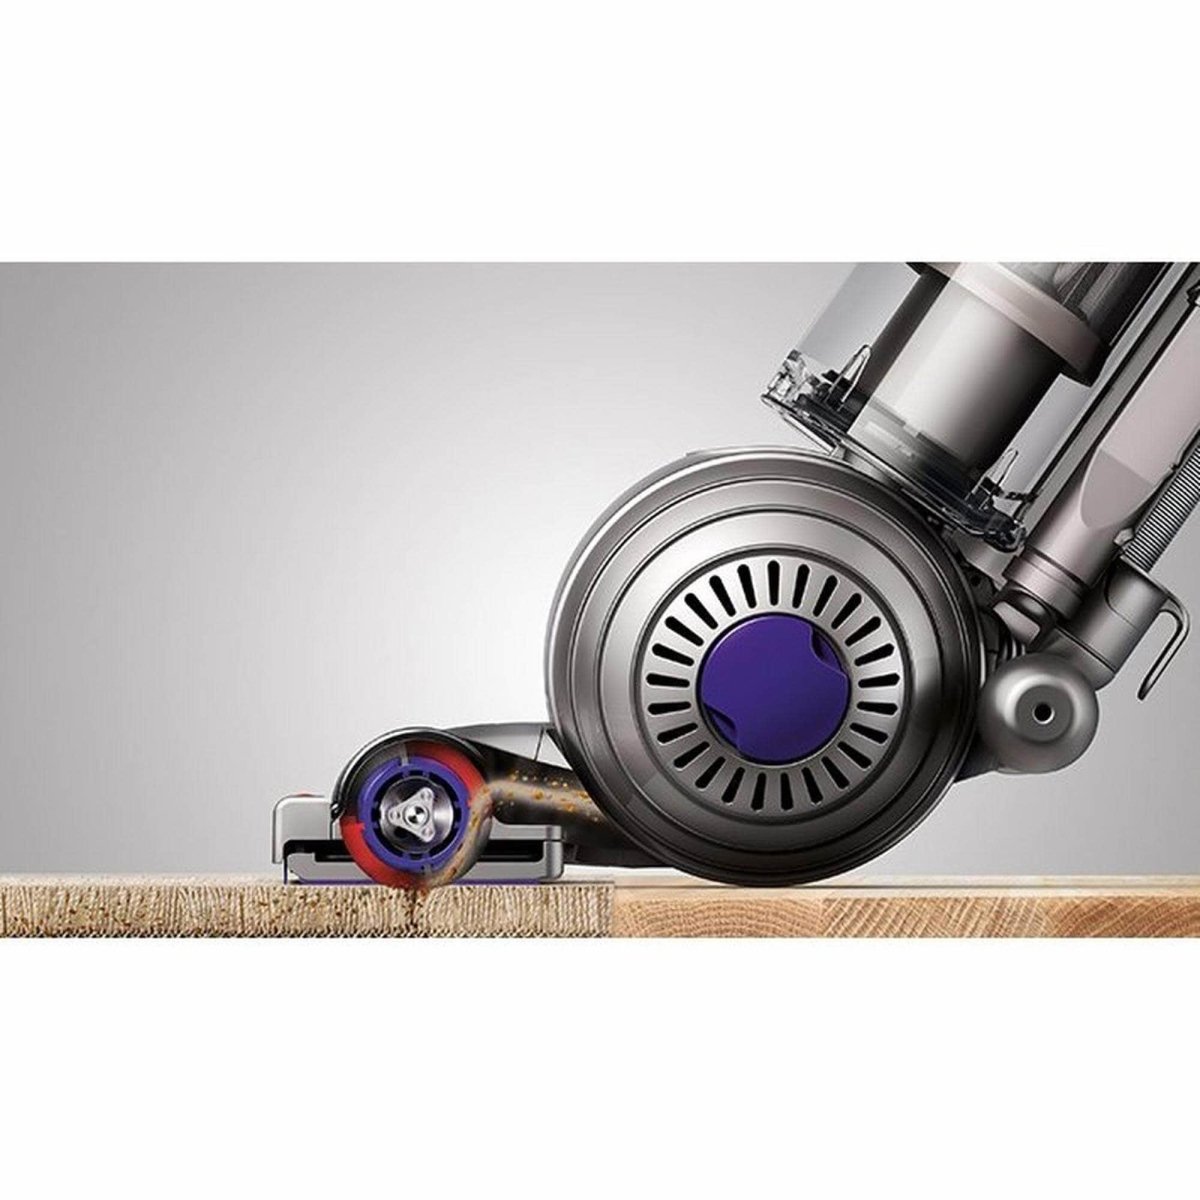 Dyson Small Ball Allergy Bagless Upright Vacuum Cleaner | Atlantic Electrics